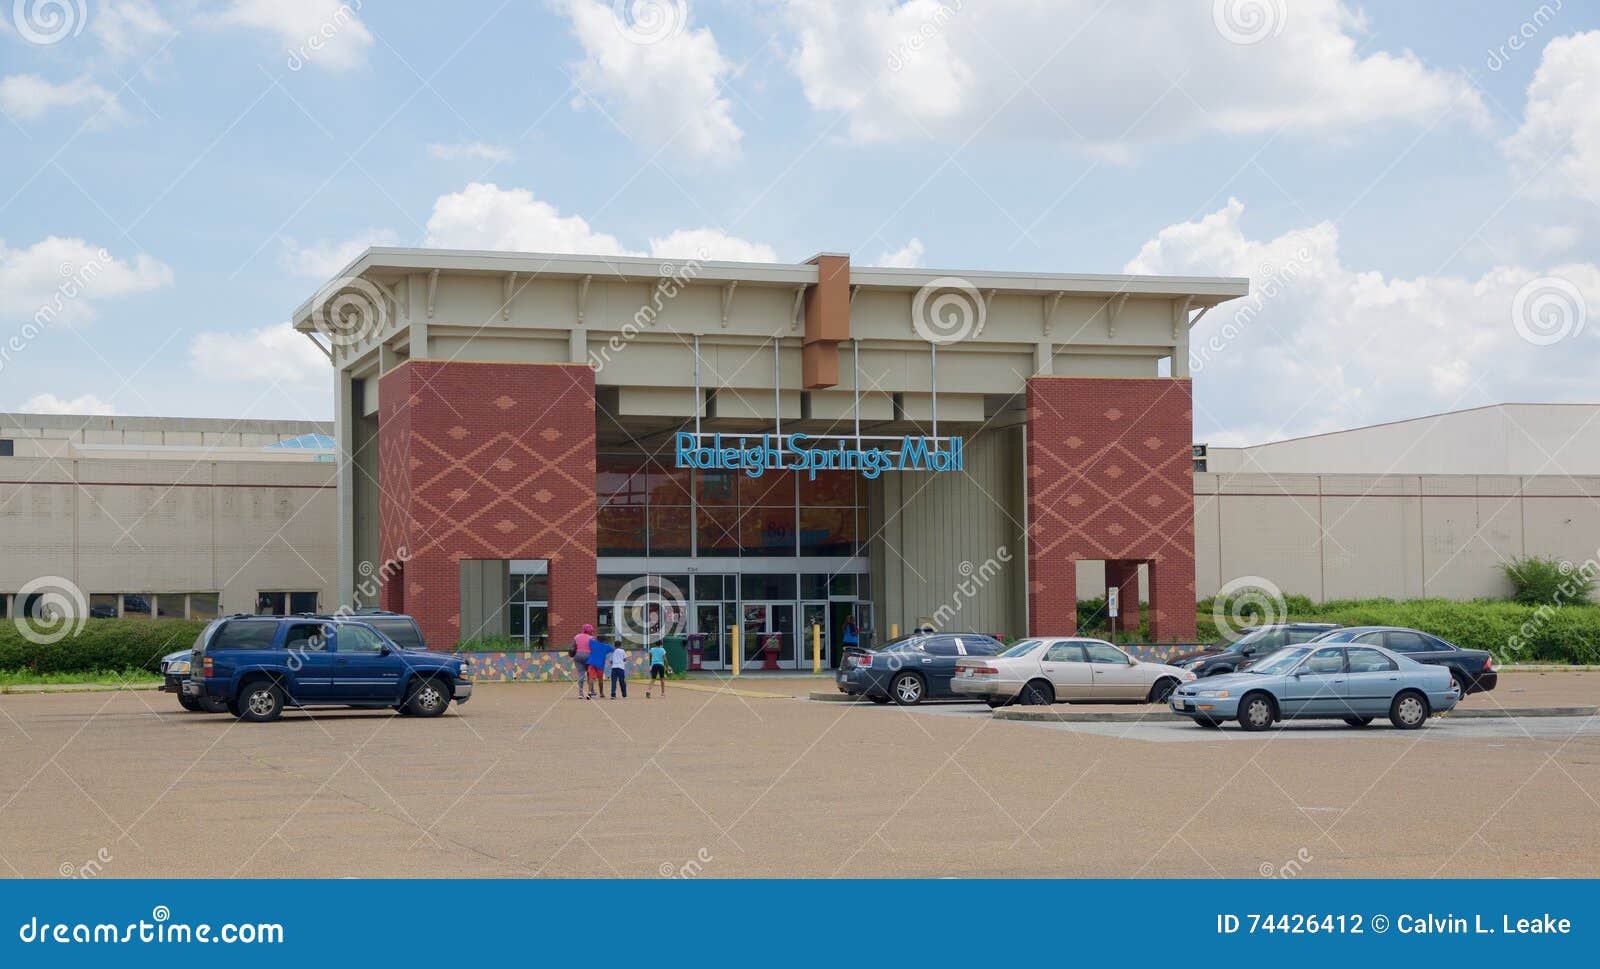 Raleigh Springs Mall, Memphis, Tennessee. Editorial Photography - Image of sears, galleria: 74426412